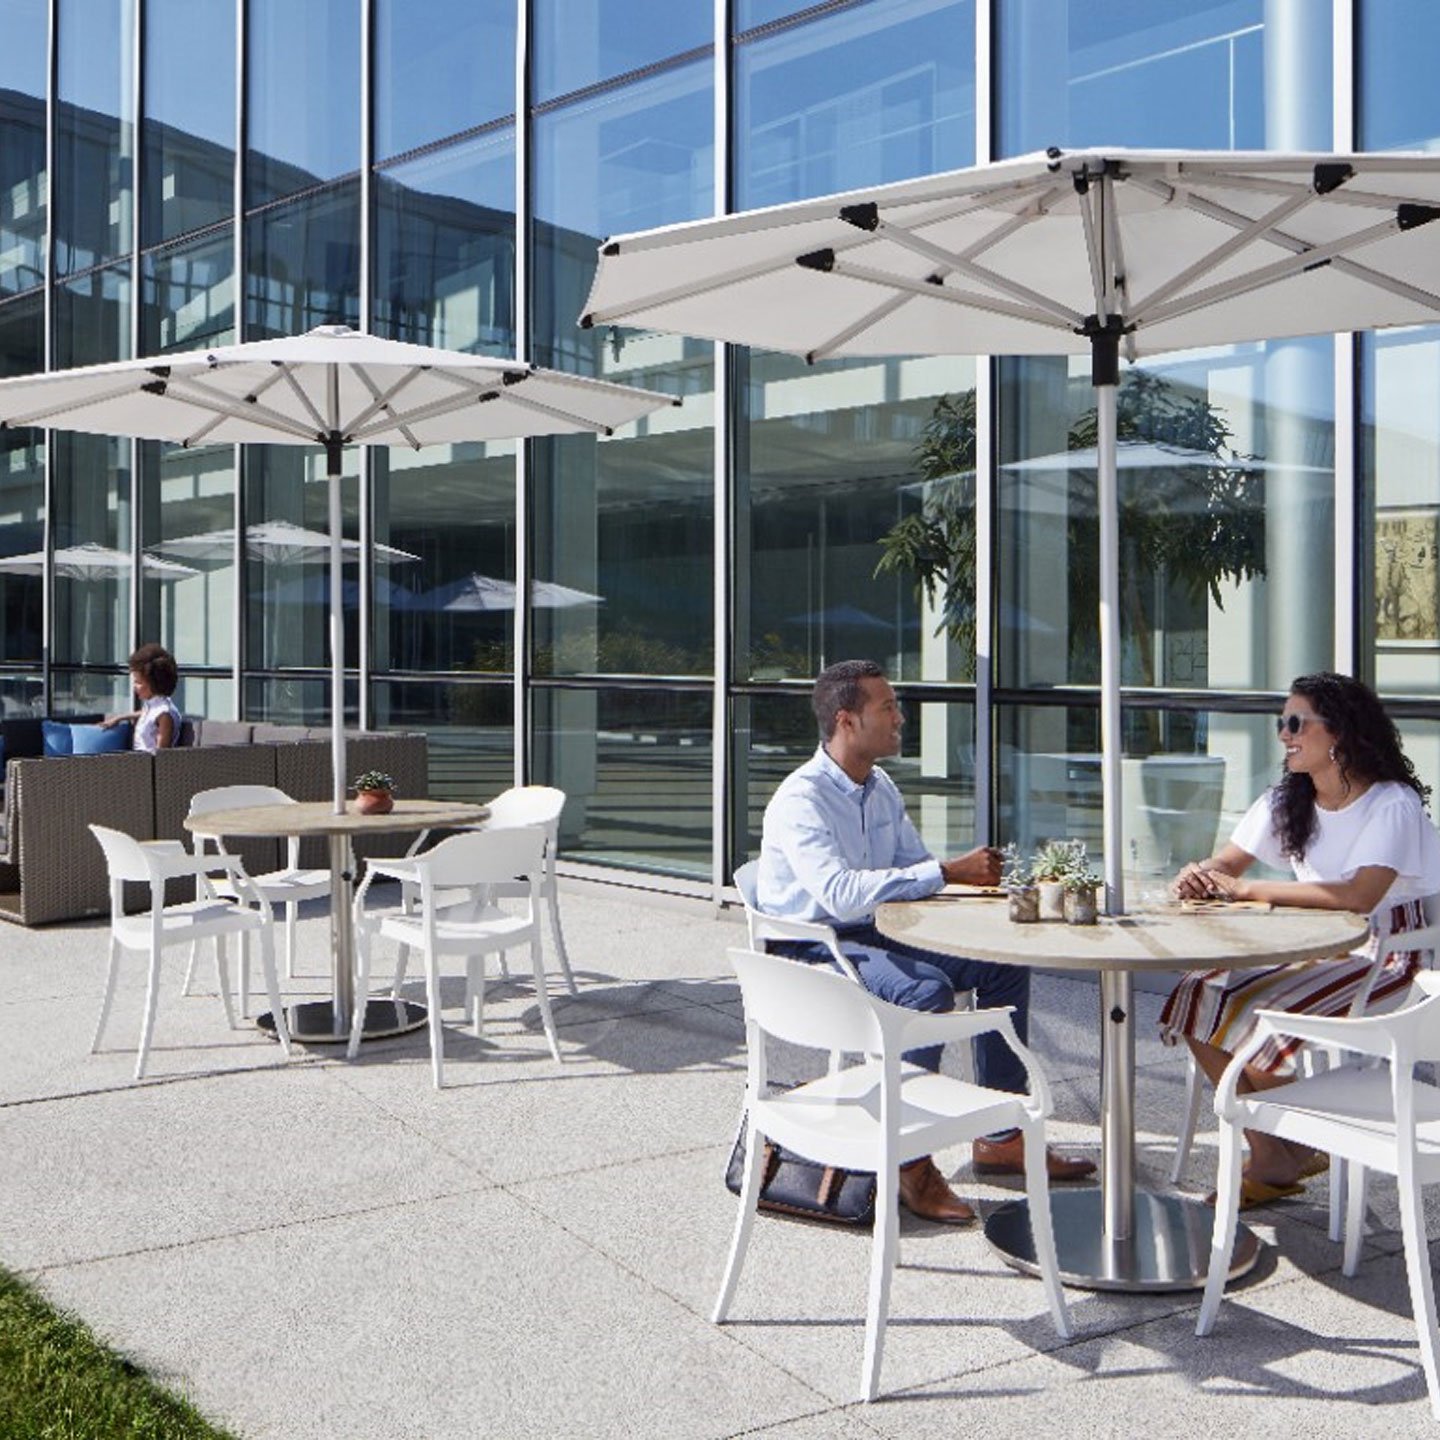 Haworth Janus Titan Umbrella Accessories in outdoor office seating area covering a table next to glass building 